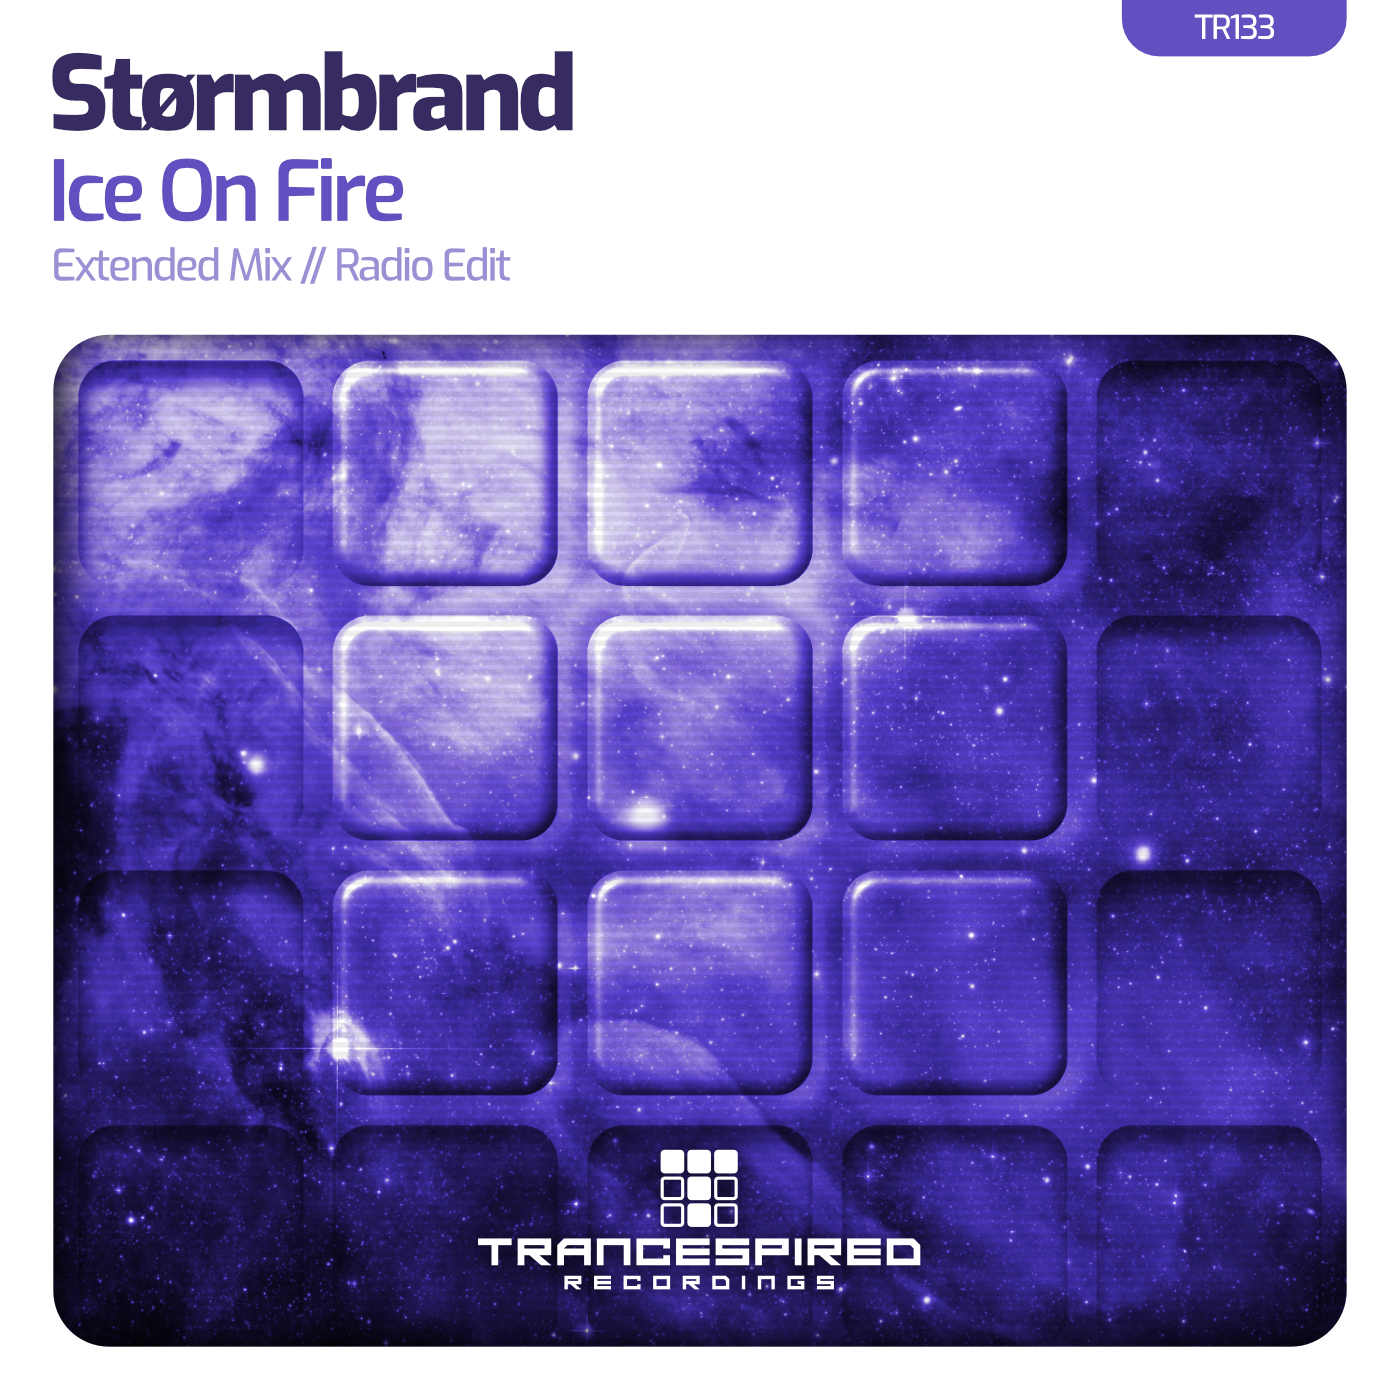 Størmbrand presents Ice On Fire on Trancespired Recordings